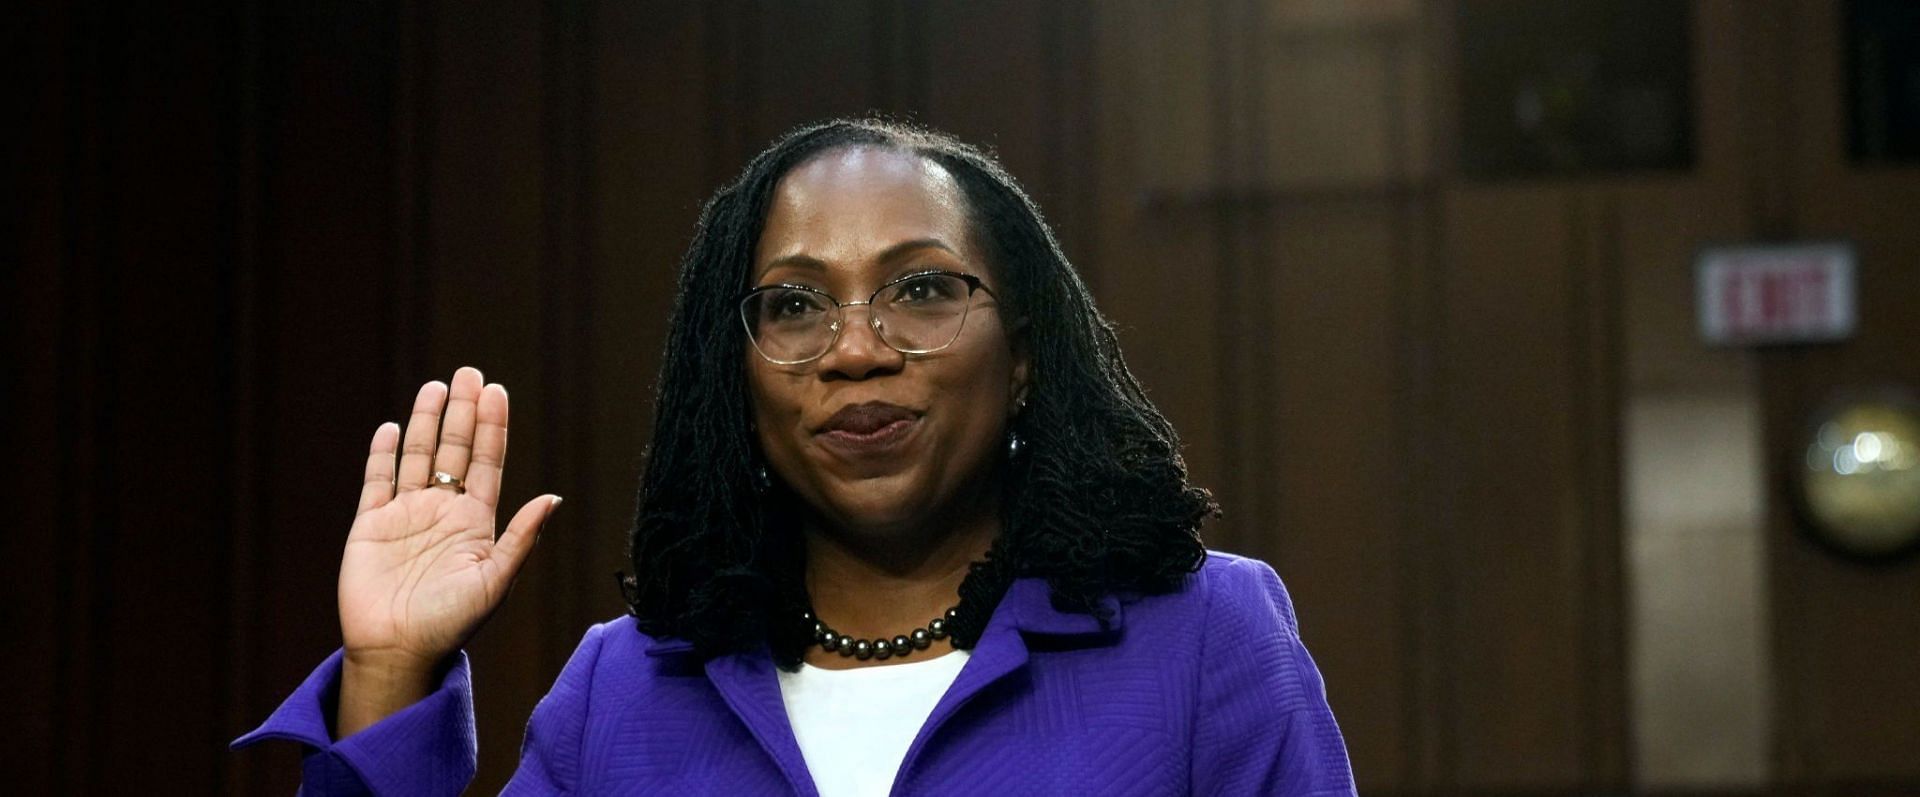 Ketanji Brown Jackson will swear in once Associate Justice Stephen Breyer steps down from the role (Image via Drew Angerer/Getty Images)